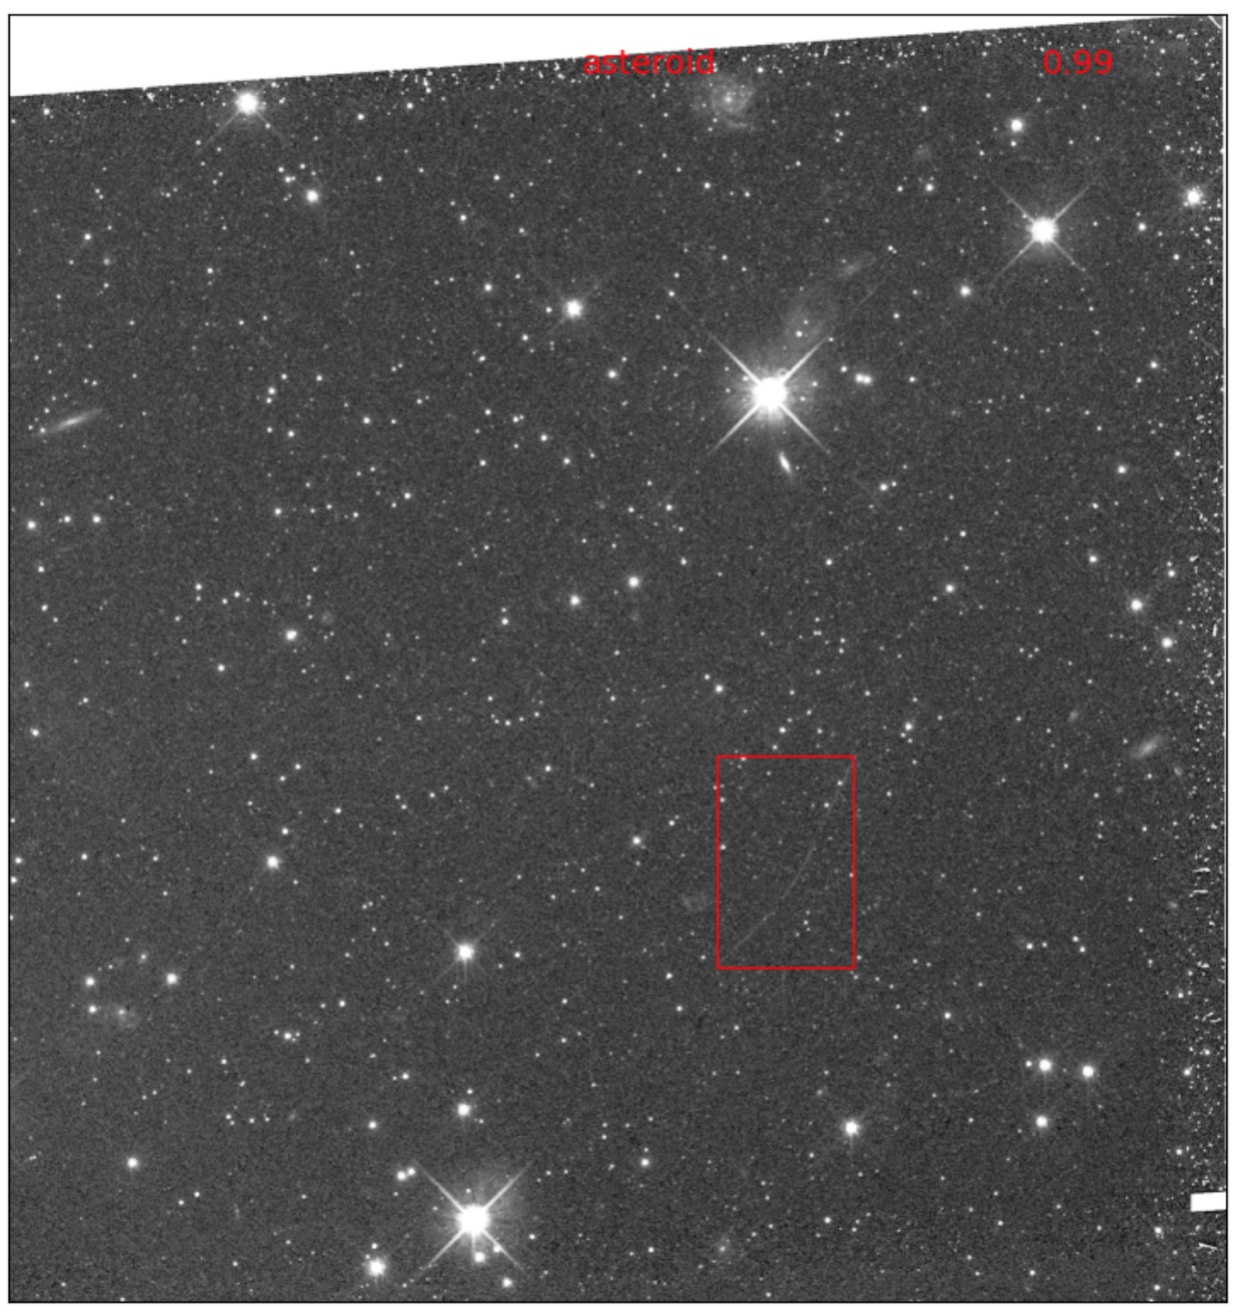 Finding asteroid trails in HST data with AutoML